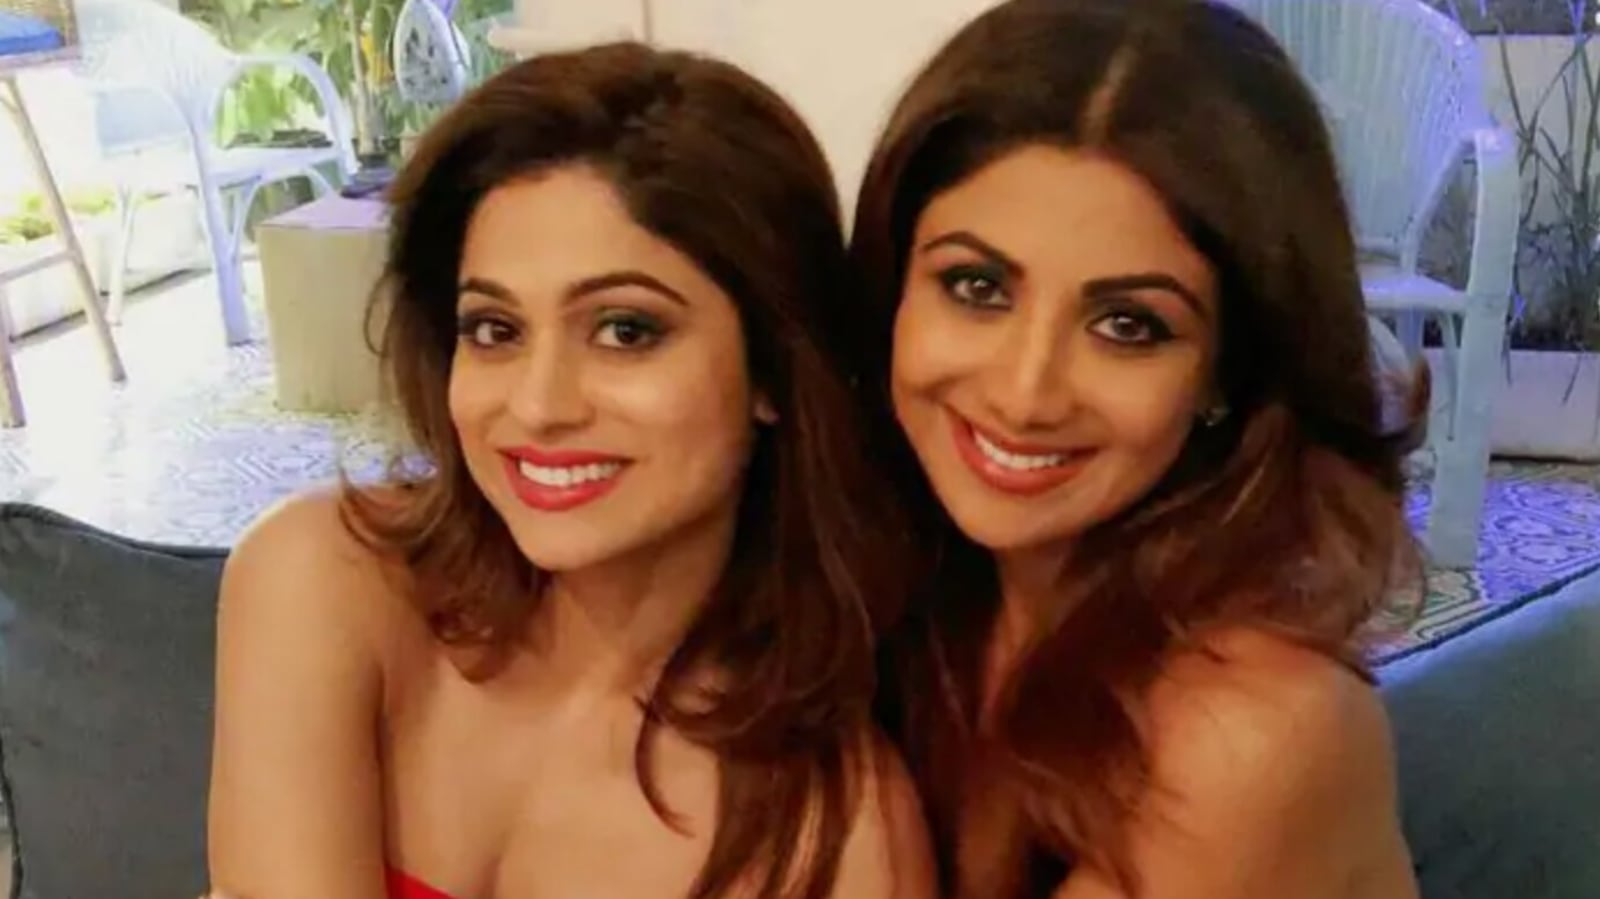 Hungama 2: Shilpa Shetty's sister Shamita Shetty asks fans to watch film,  assures her of better days | Bollywood - Hindustan Times